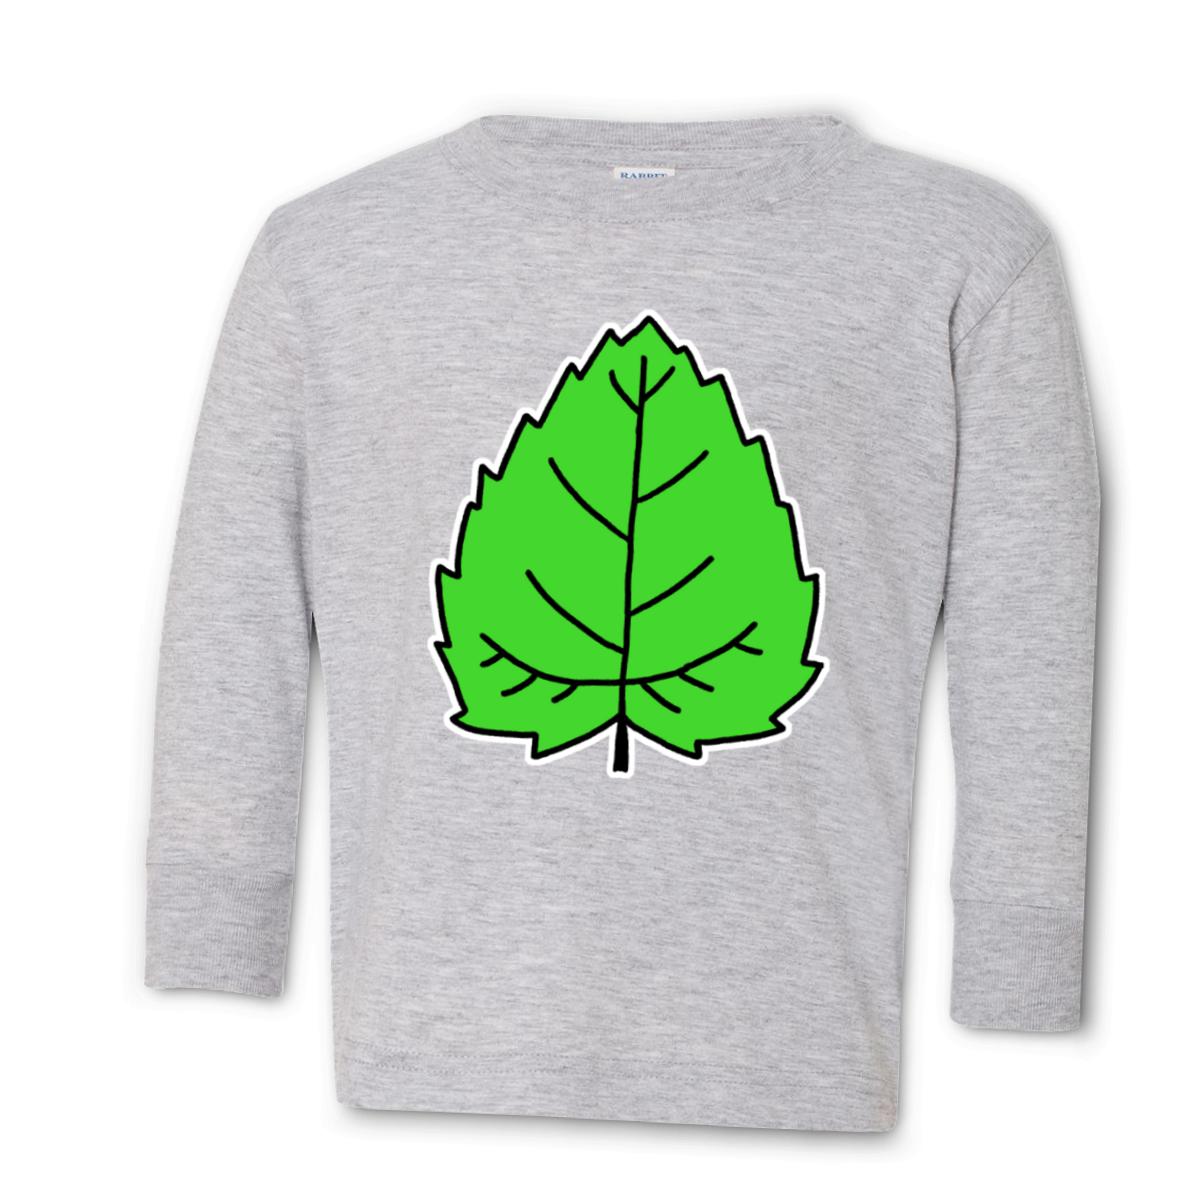 Mulberry Leaf Toddler Long Sleeve Tee 4T heather